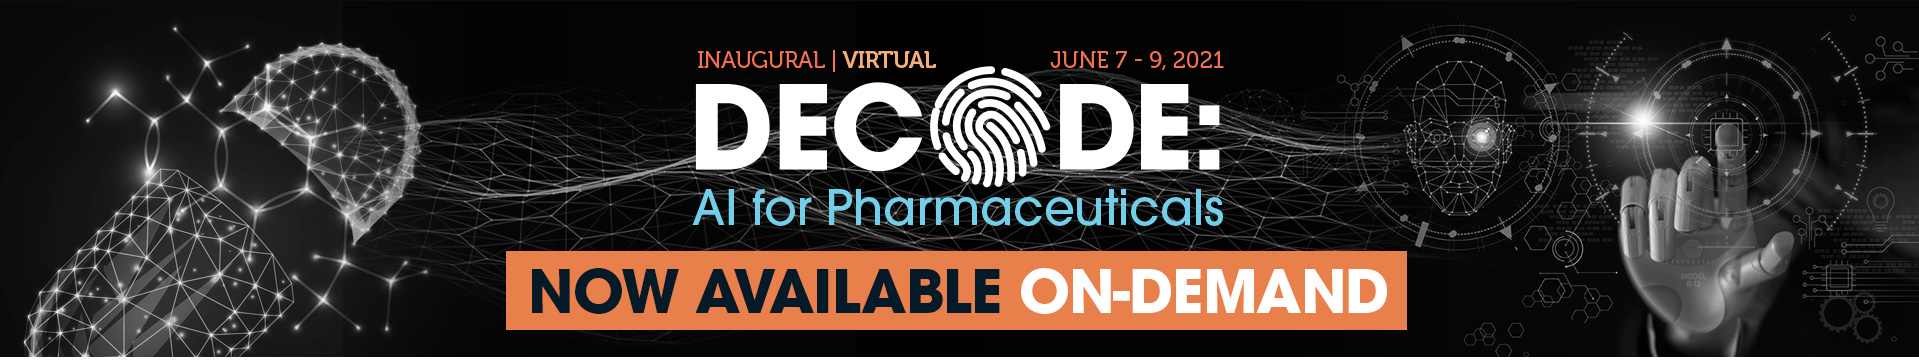 DECODE: AI for Pharmaceuticals Banner Image